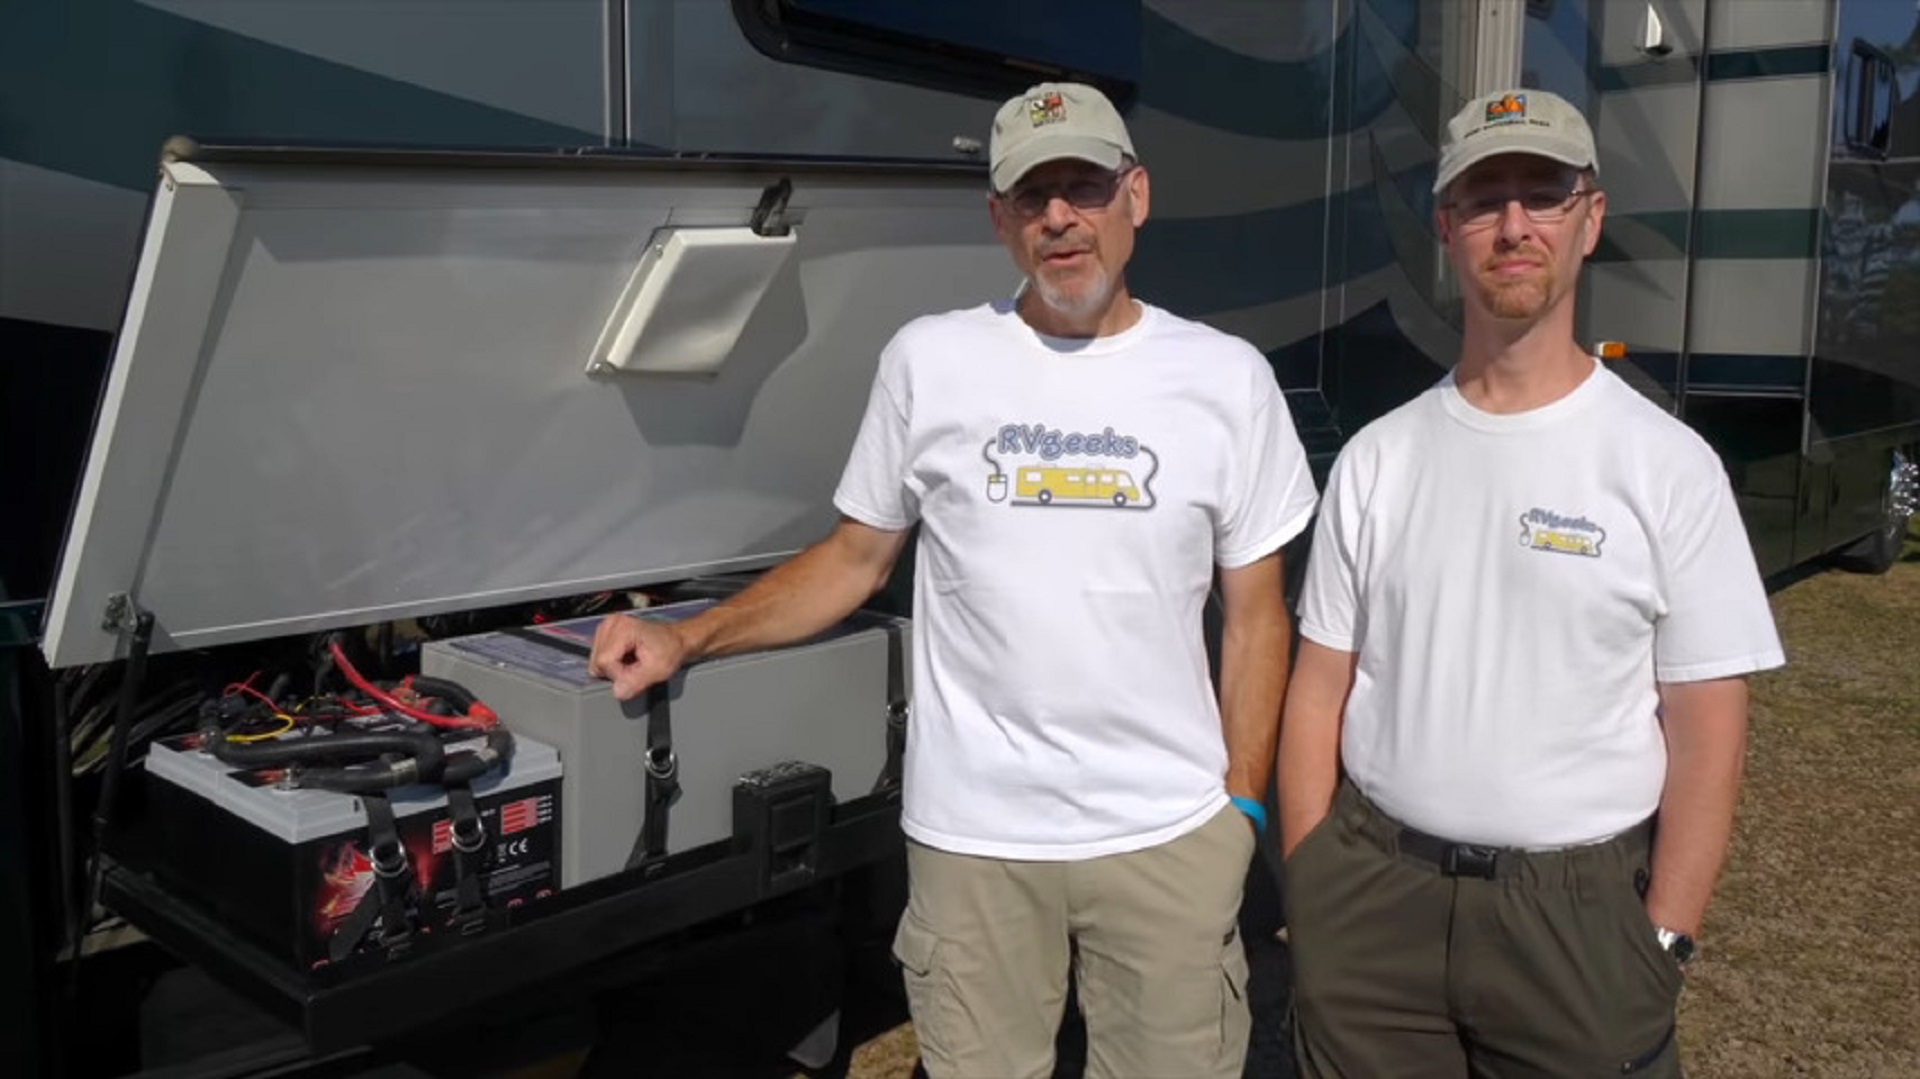 The RVgeeks with their Xantrex Freedom eGEN battery with BMS